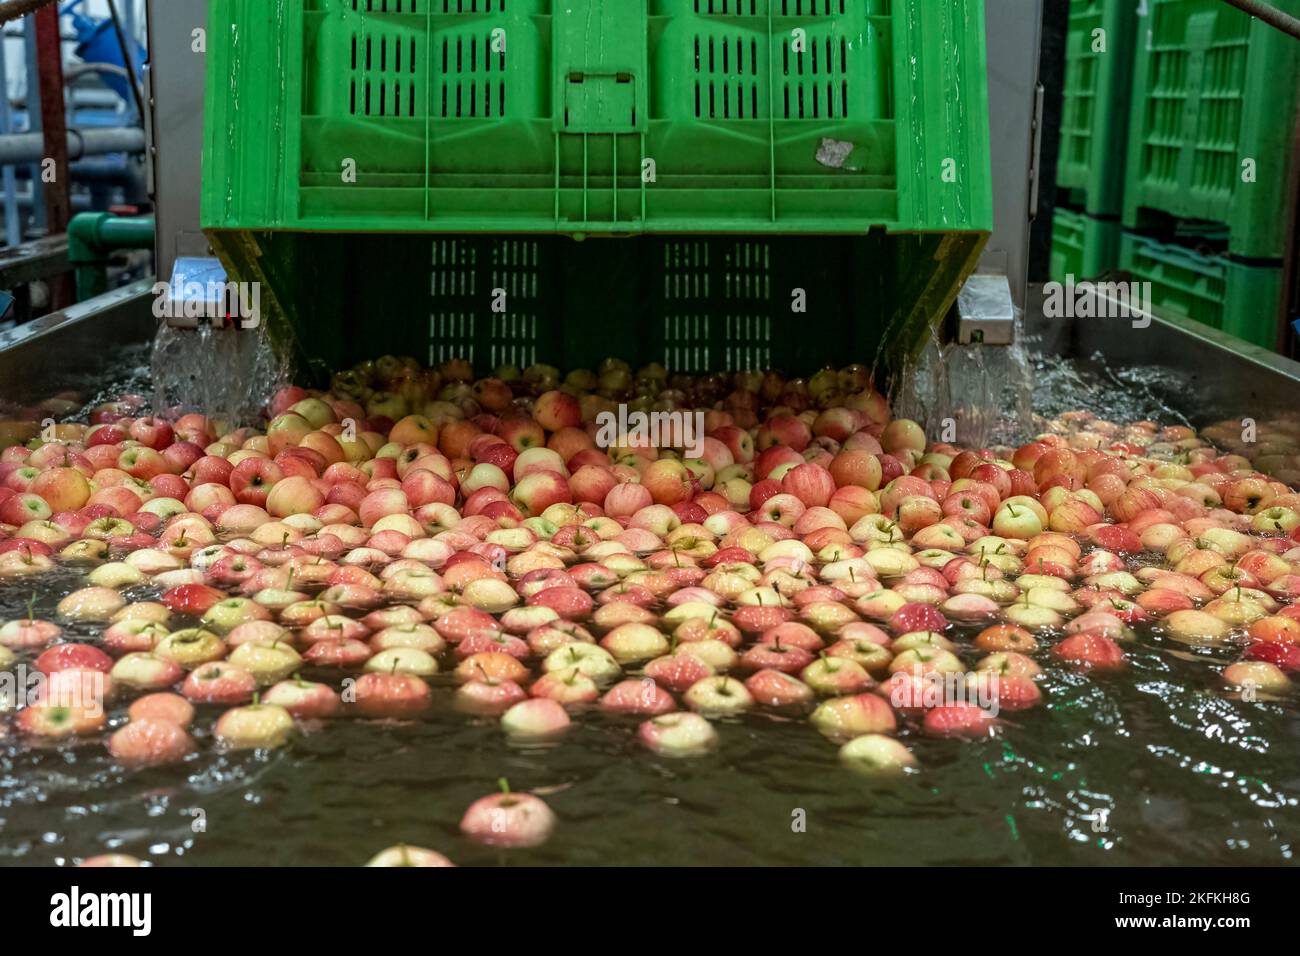 Fresh Apples Floating And Being Washed And Transported In Water Tank Conveyor. Postharvest Handling Of Apples. Stock Photo